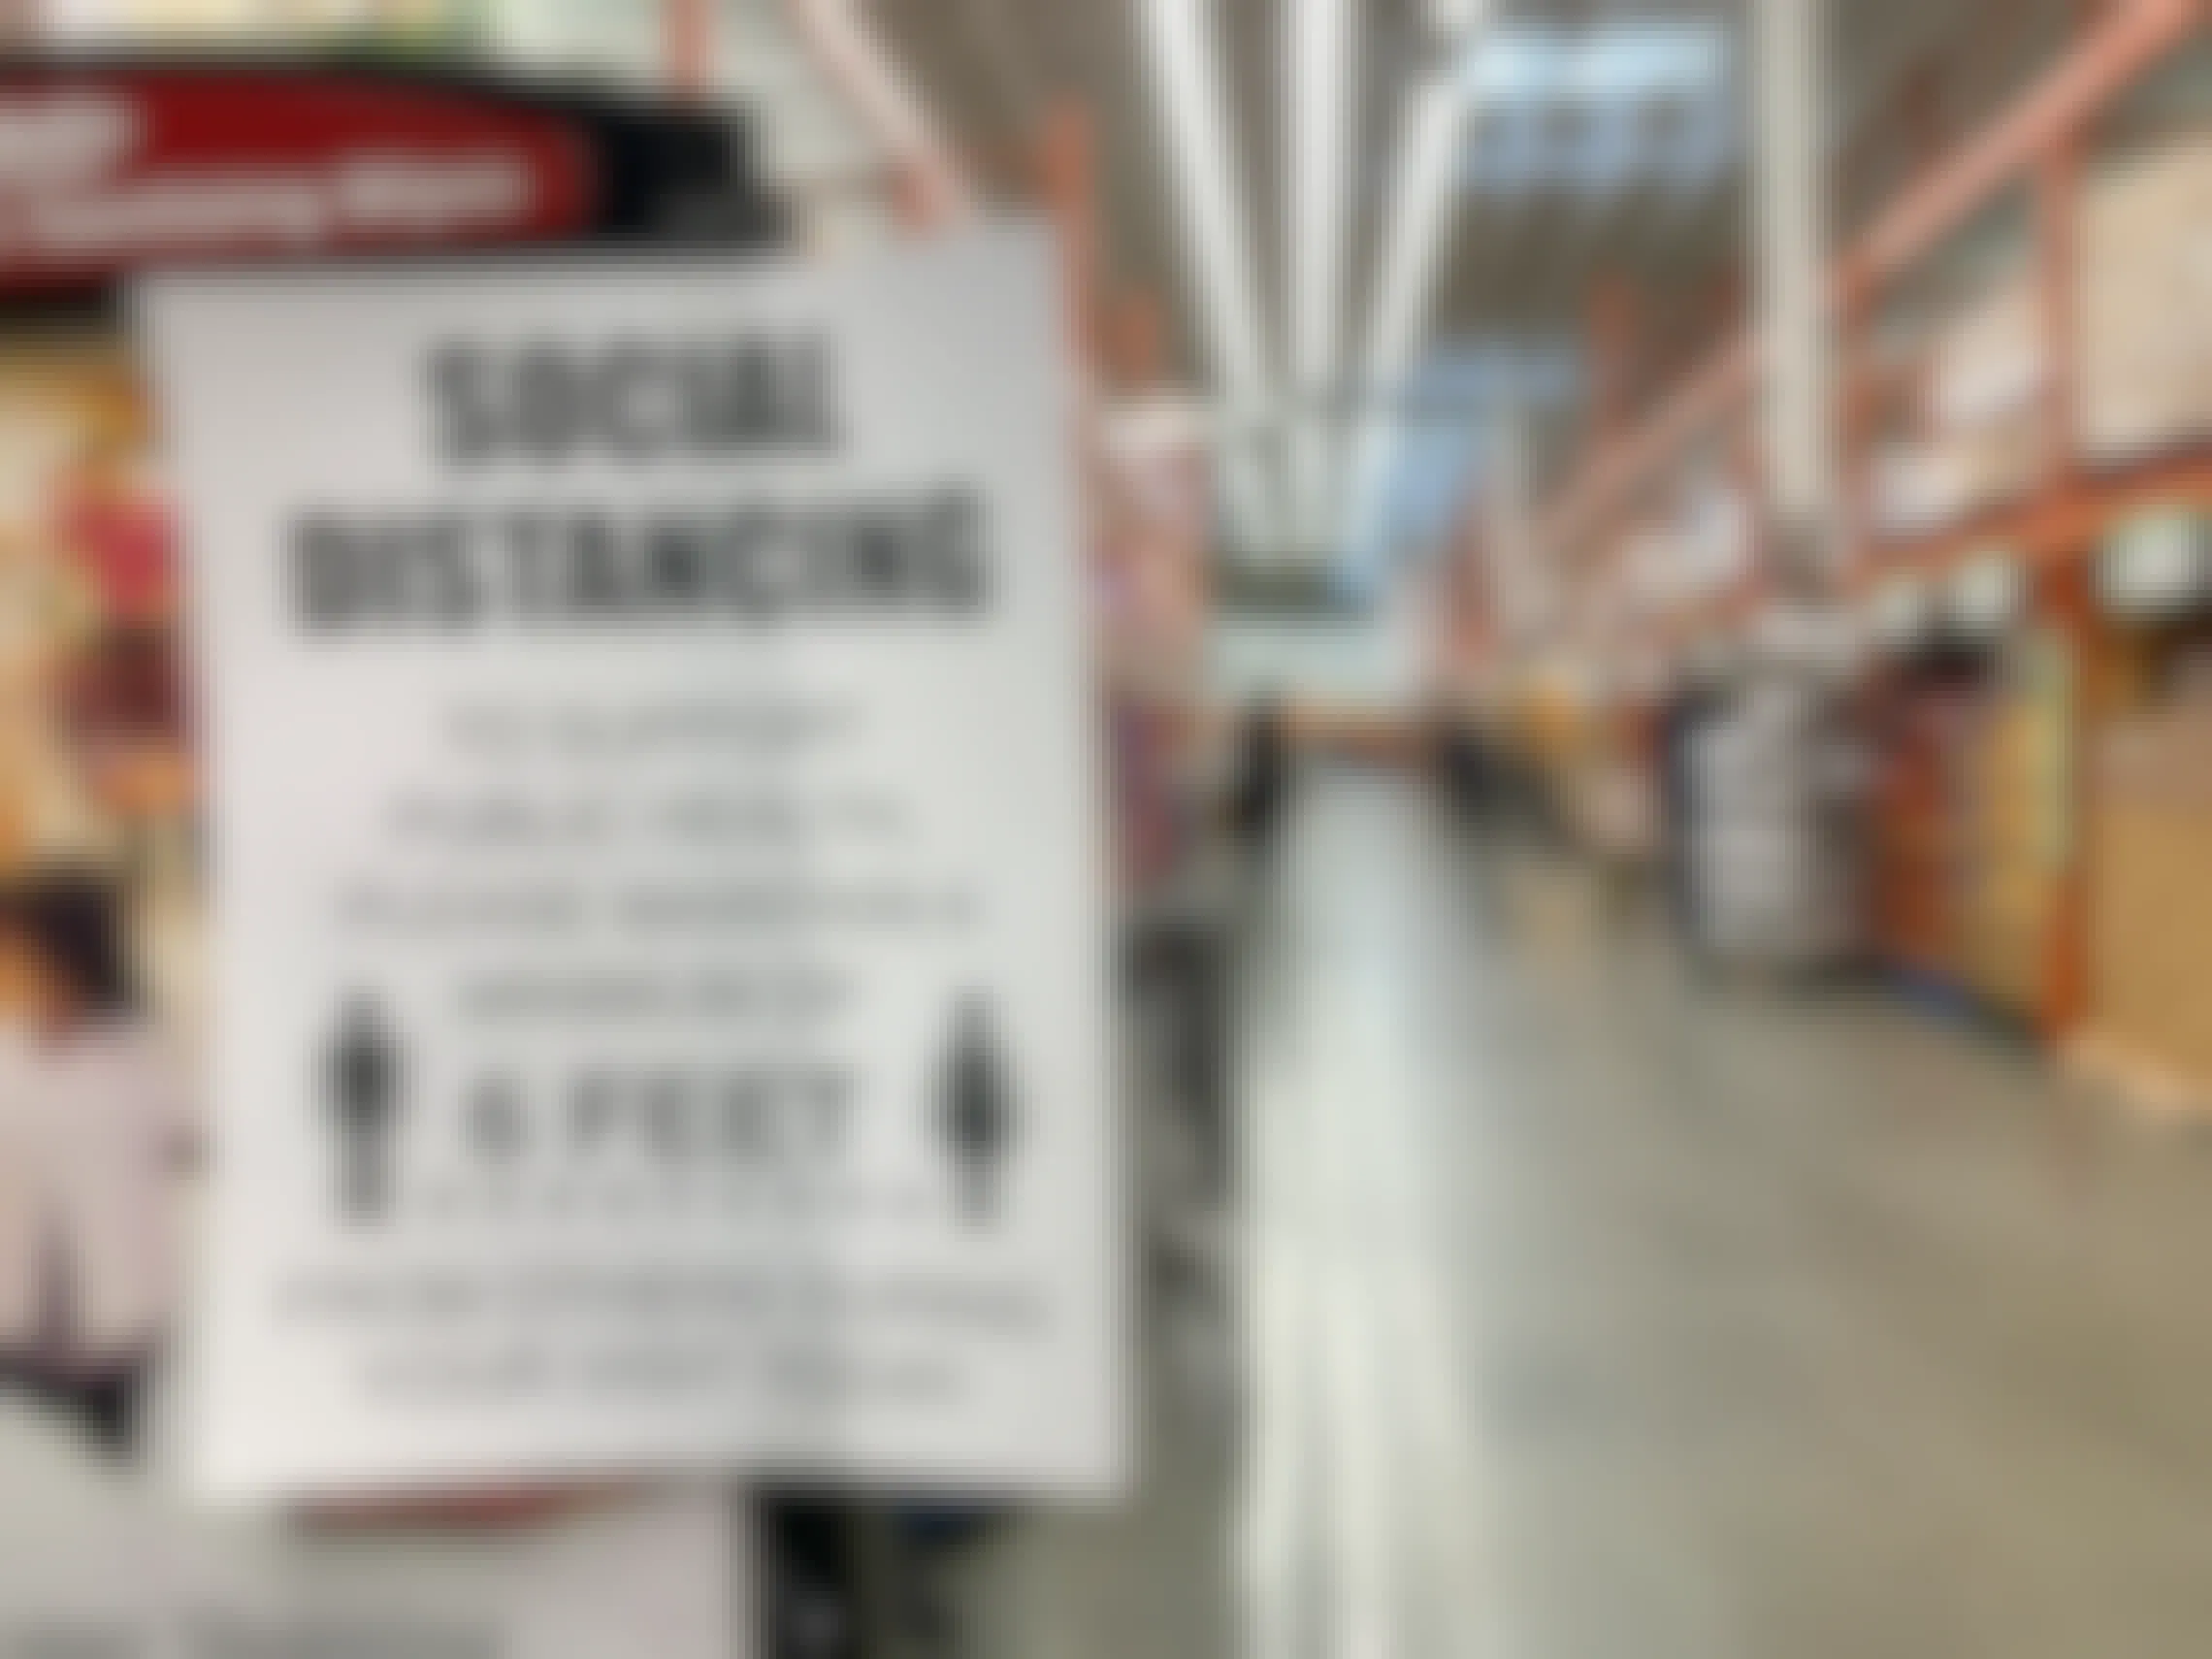 A sign posted inside a grocery store reminding people of "social distancing" as they shop.